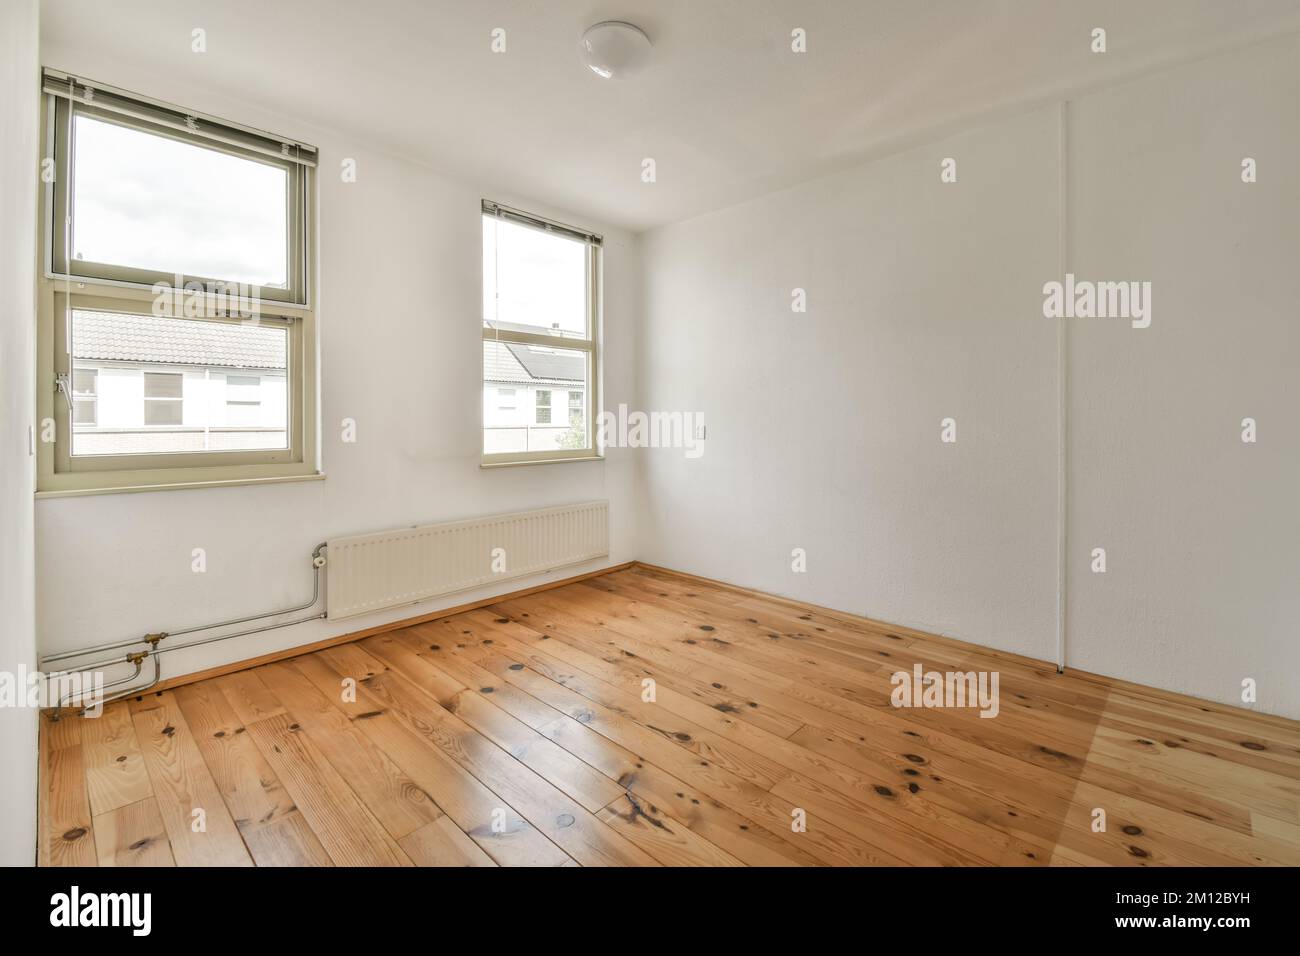 an empty room with wood flooring and white paint on the walls, there is a window in the corner Stock Photo